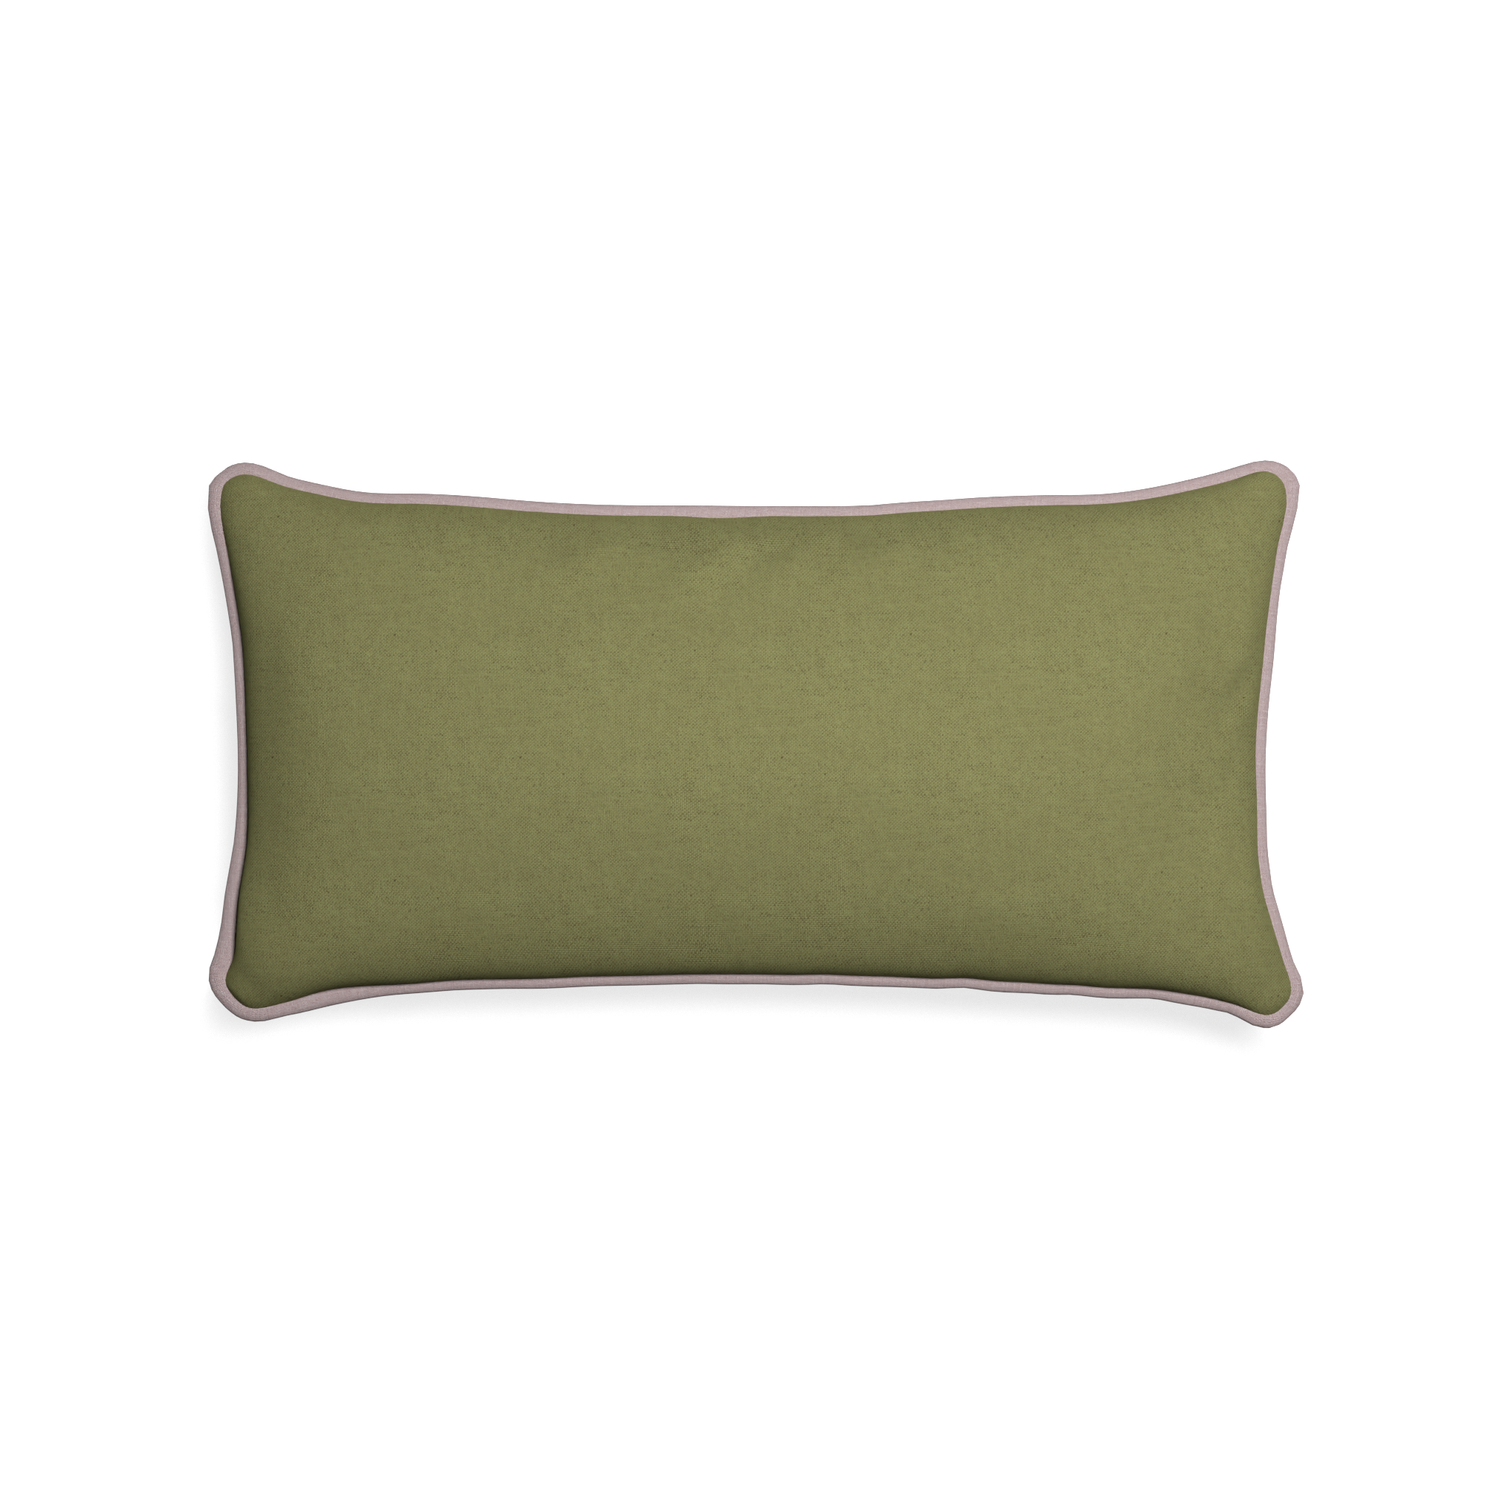 Midi-lumbar moss custom moss greenpillow with orchid piping on white background